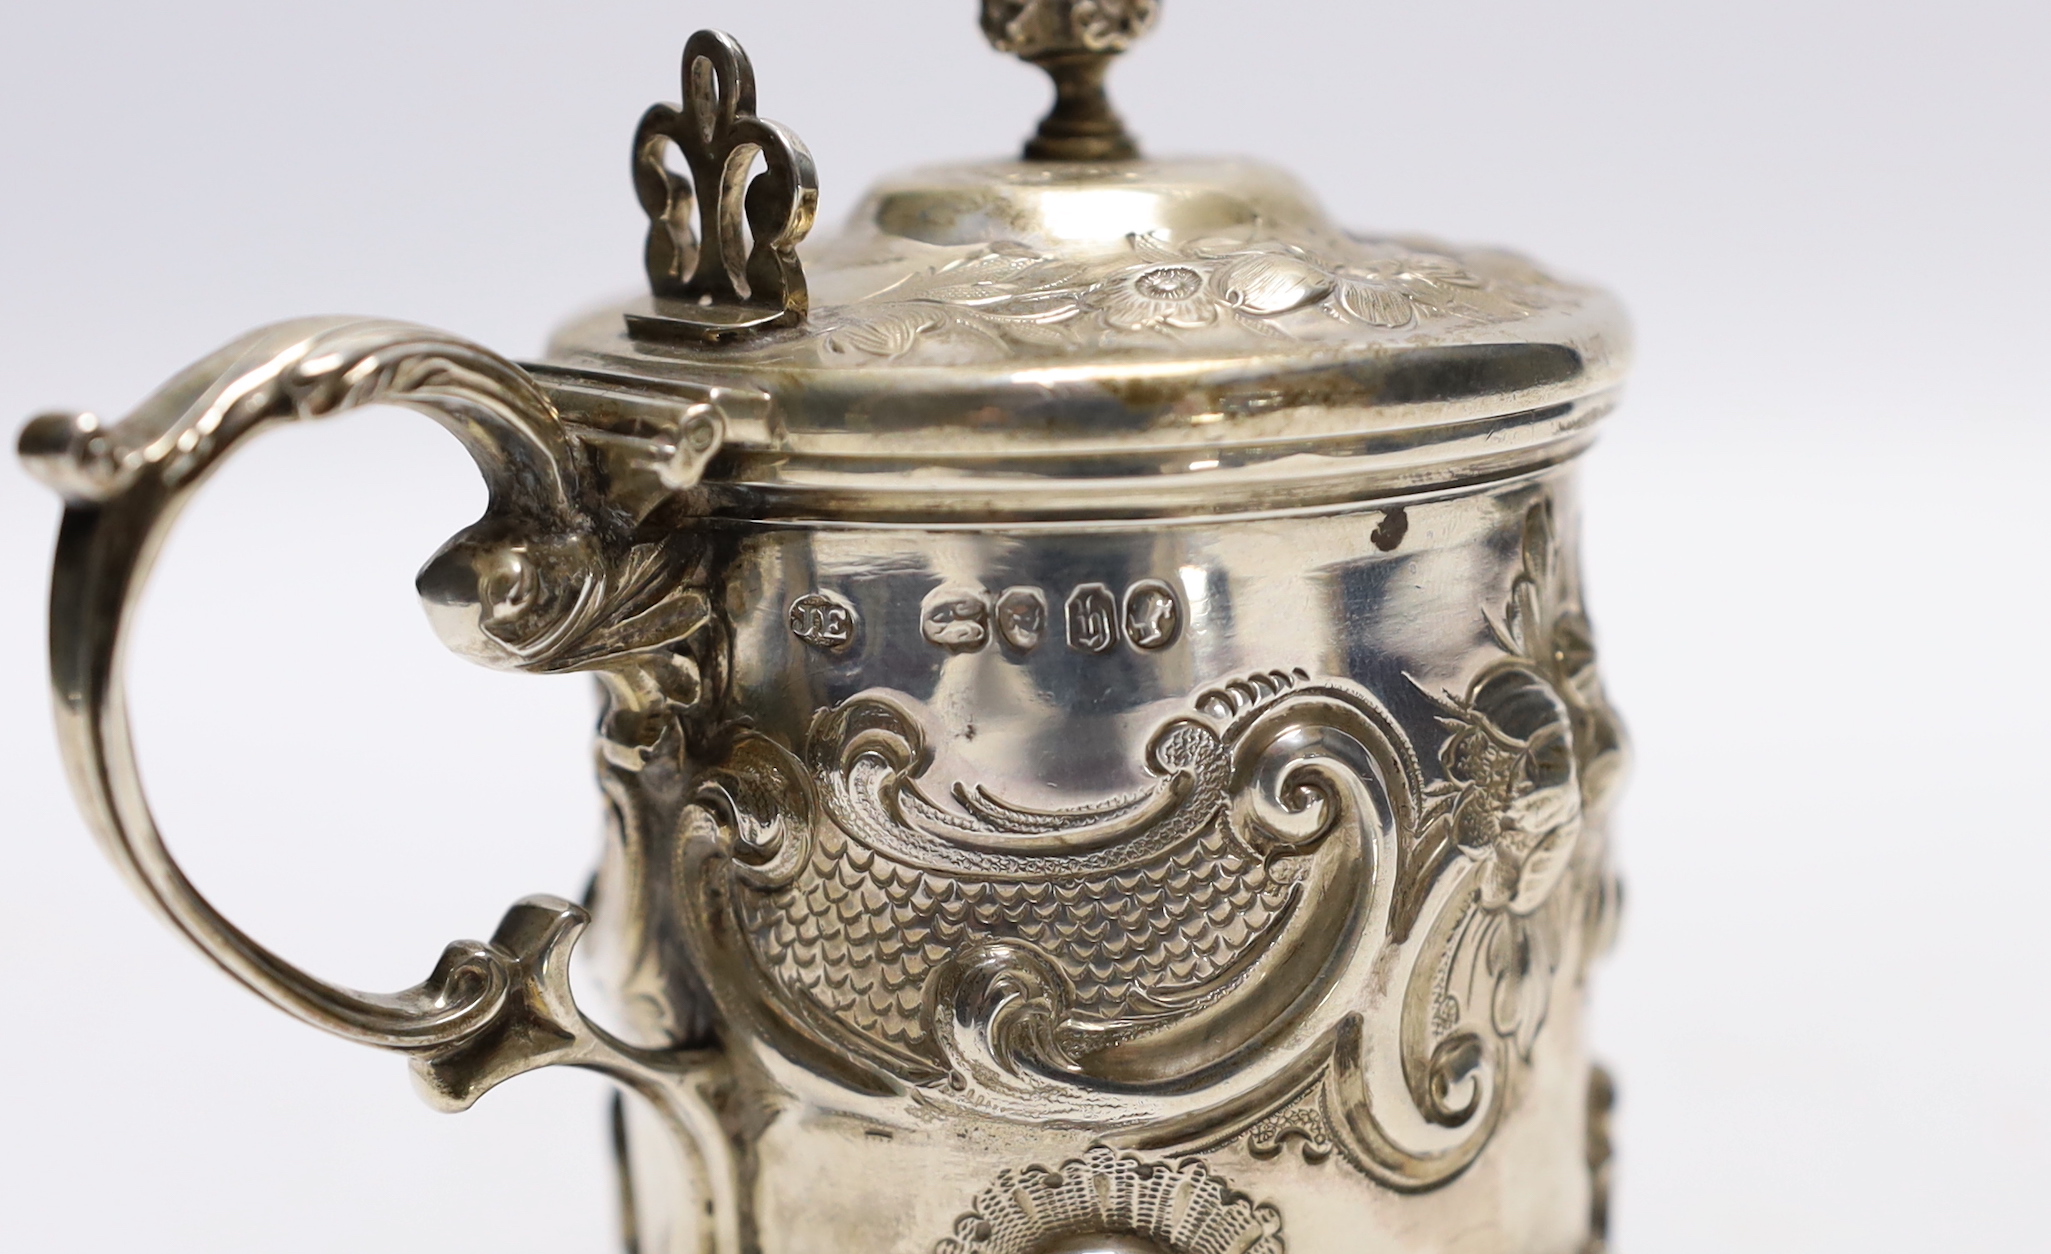 A Victorian embossed silver drum mustard, John Evans II, London, 1863, decorated with foliage and scrolls.